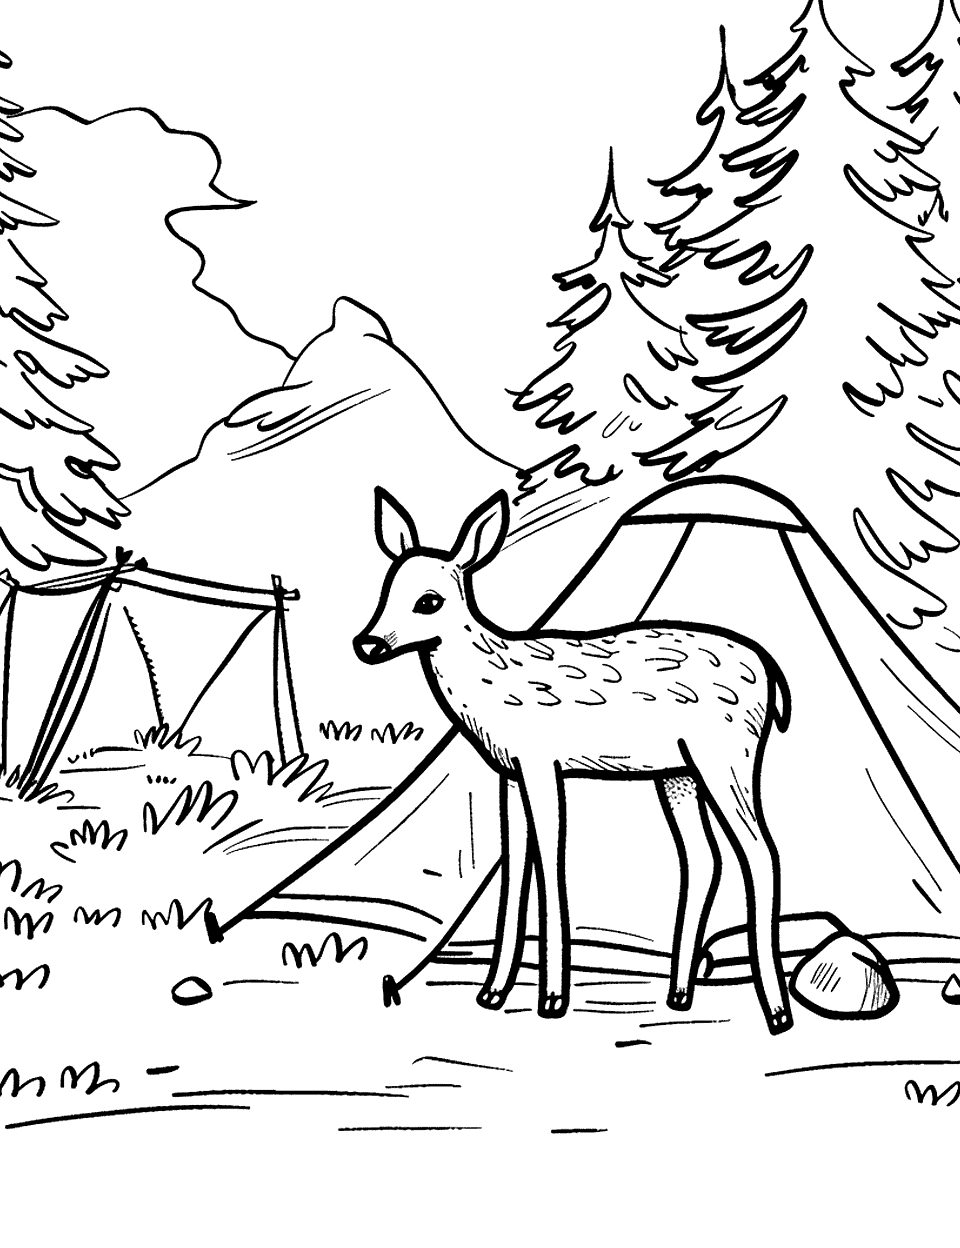 Forest Animals Watching Campers Camping Coloring Page - A deer watching a campsite out of curiosity.